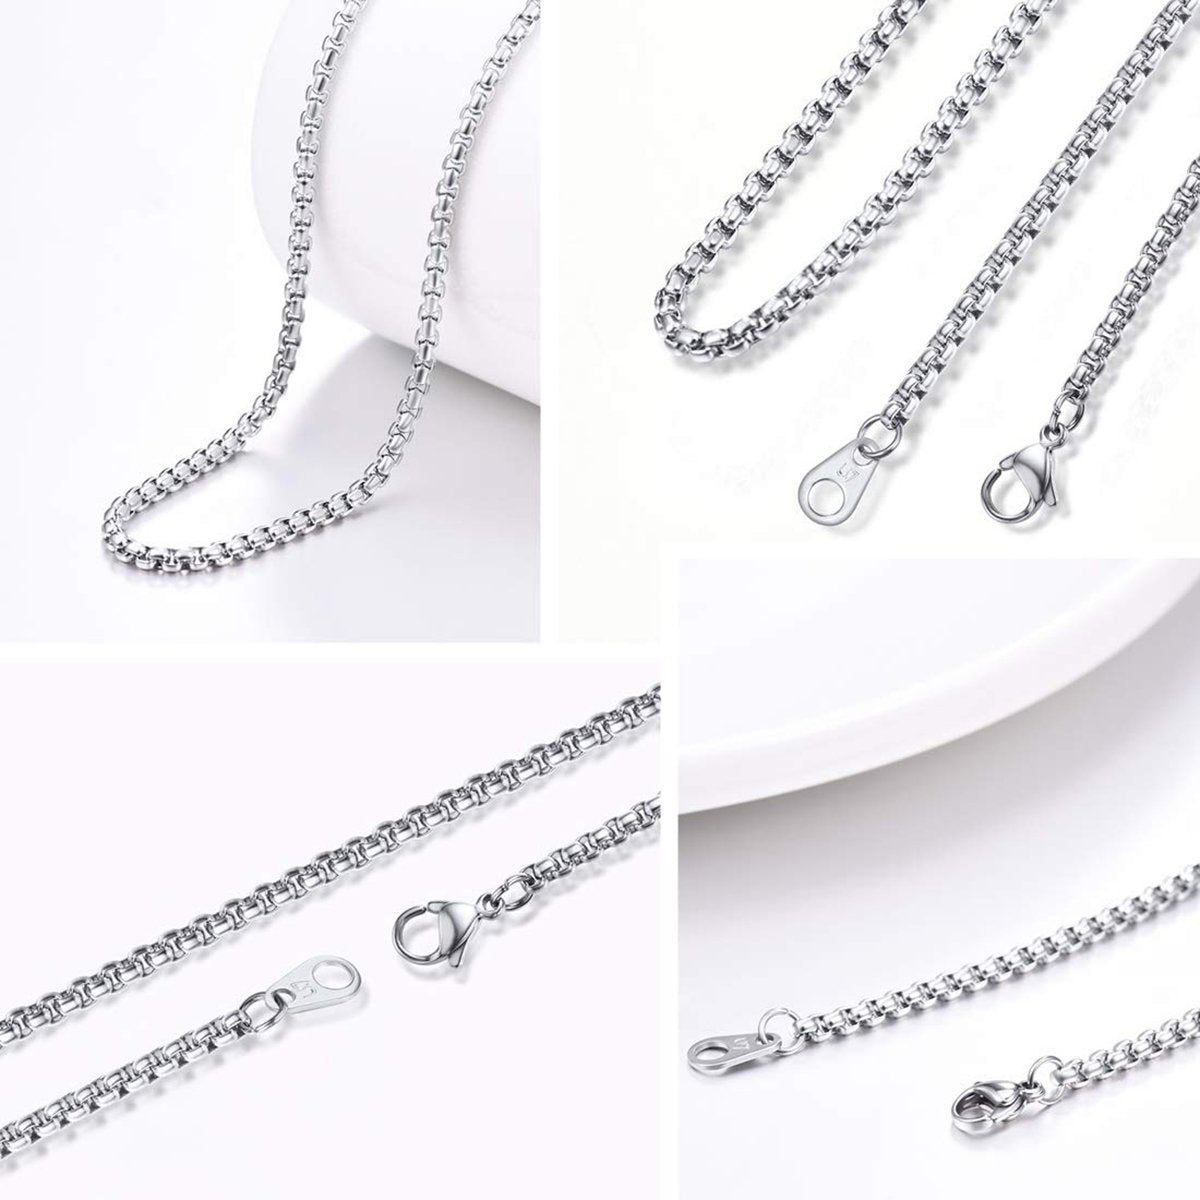 Men's Silver Chain / Silver 5mm Curb Chain Necklace for Men or Woman /  Stainless Steel Waterproof Chunky Chain / Thick Men's Silver Necklace - Etsy